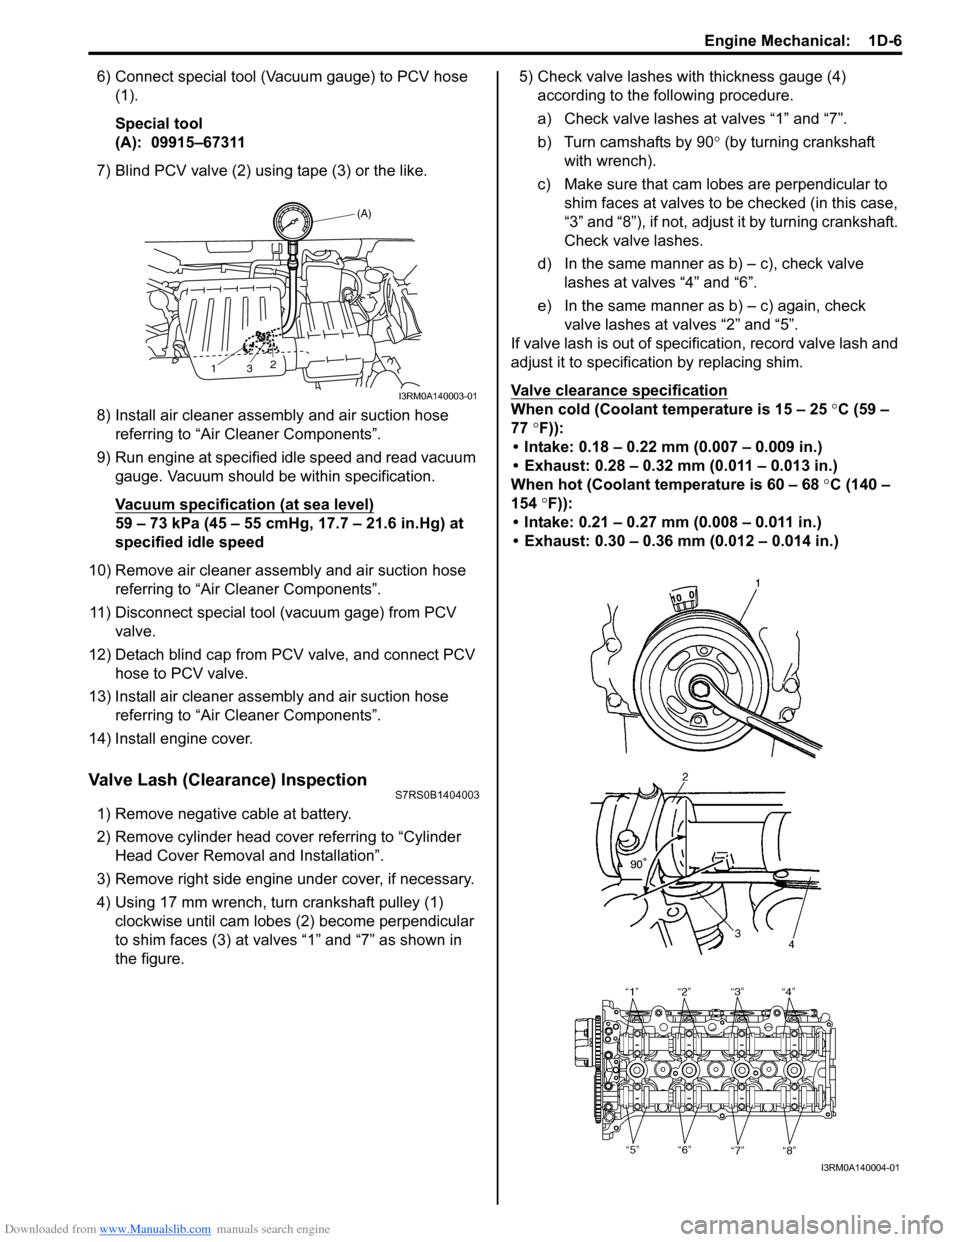 SUZUKI SWIFT 2005 2.G Service Workshop Manual Downloaded from www.Manualslib.com manuals search engine Engine Mechanical:  1D-6
6) Connect special tool (Vacuum gauge) to PCV hose (1).
Special tool
(A):  09915–67311
7) Blind PCV valve (2) using 